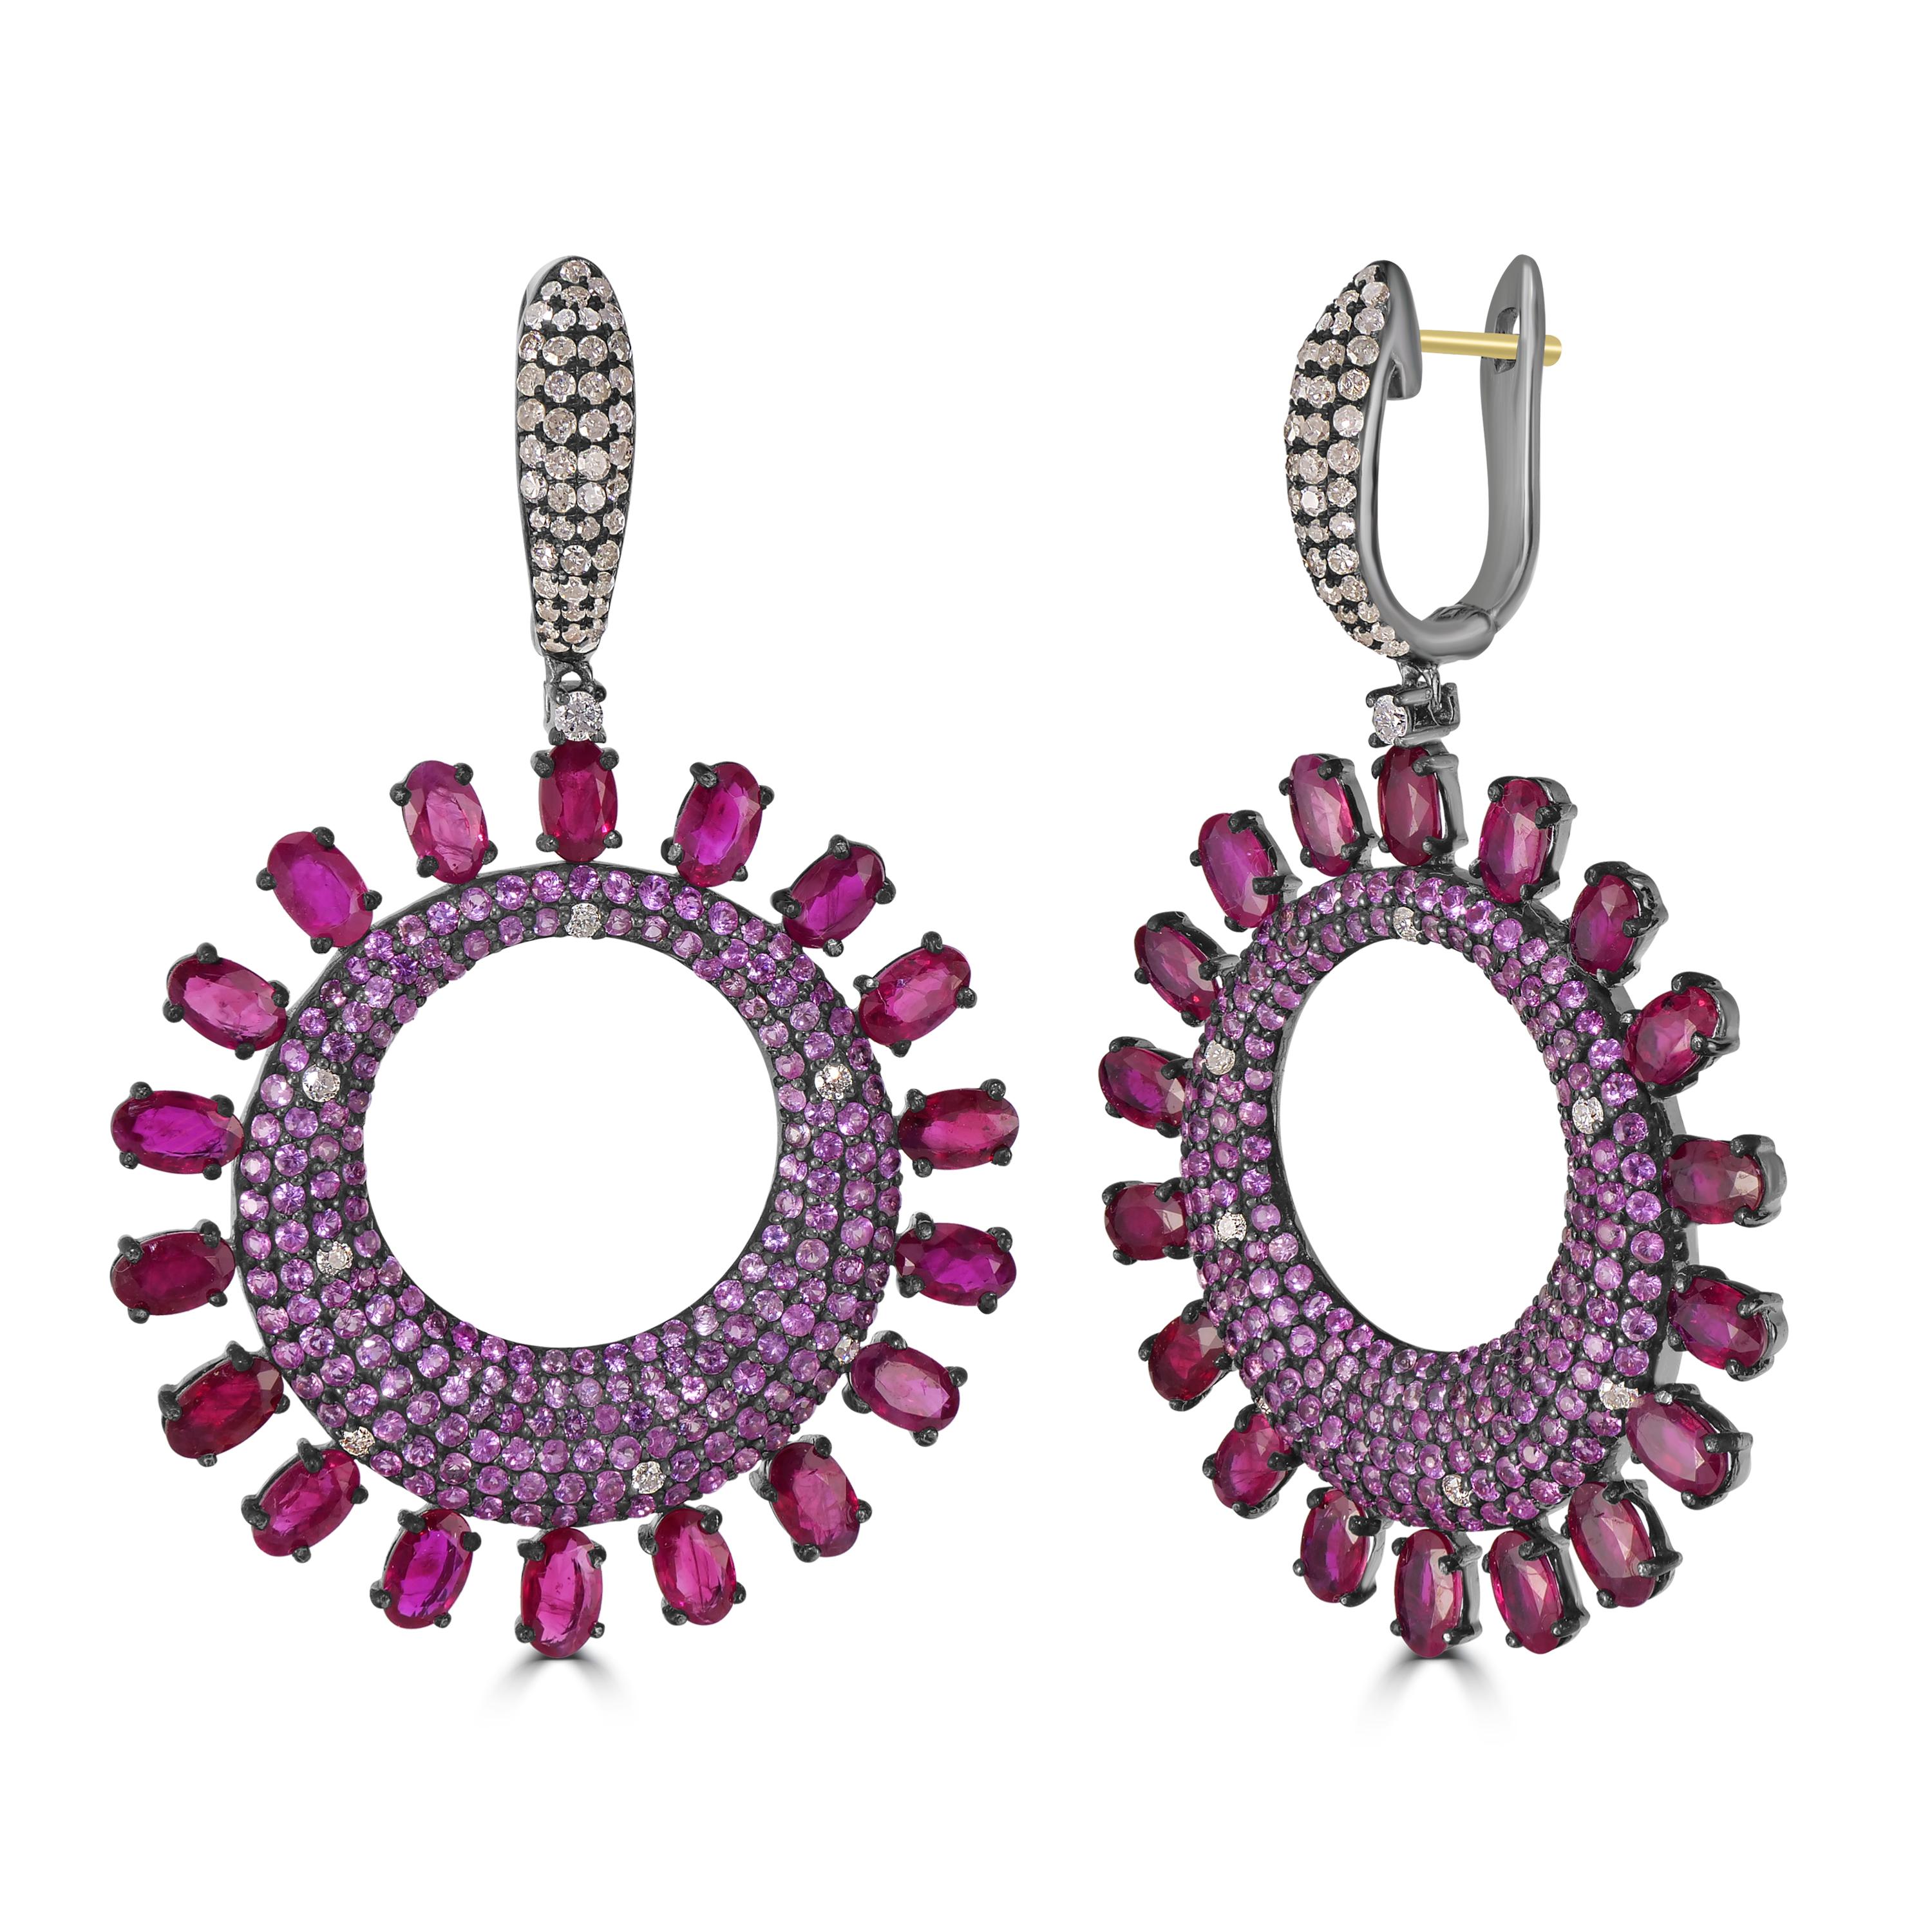 Introducing the enchanting Victorian 15.72 Cttw. Pink Sapphire, Ruby, and Diamond Dangle Earrings—a symphony of elegance and vibrant hues.

The focal point of these exquisite earrings is a circular drop, a kaleidoscope of pave pink sapphires and